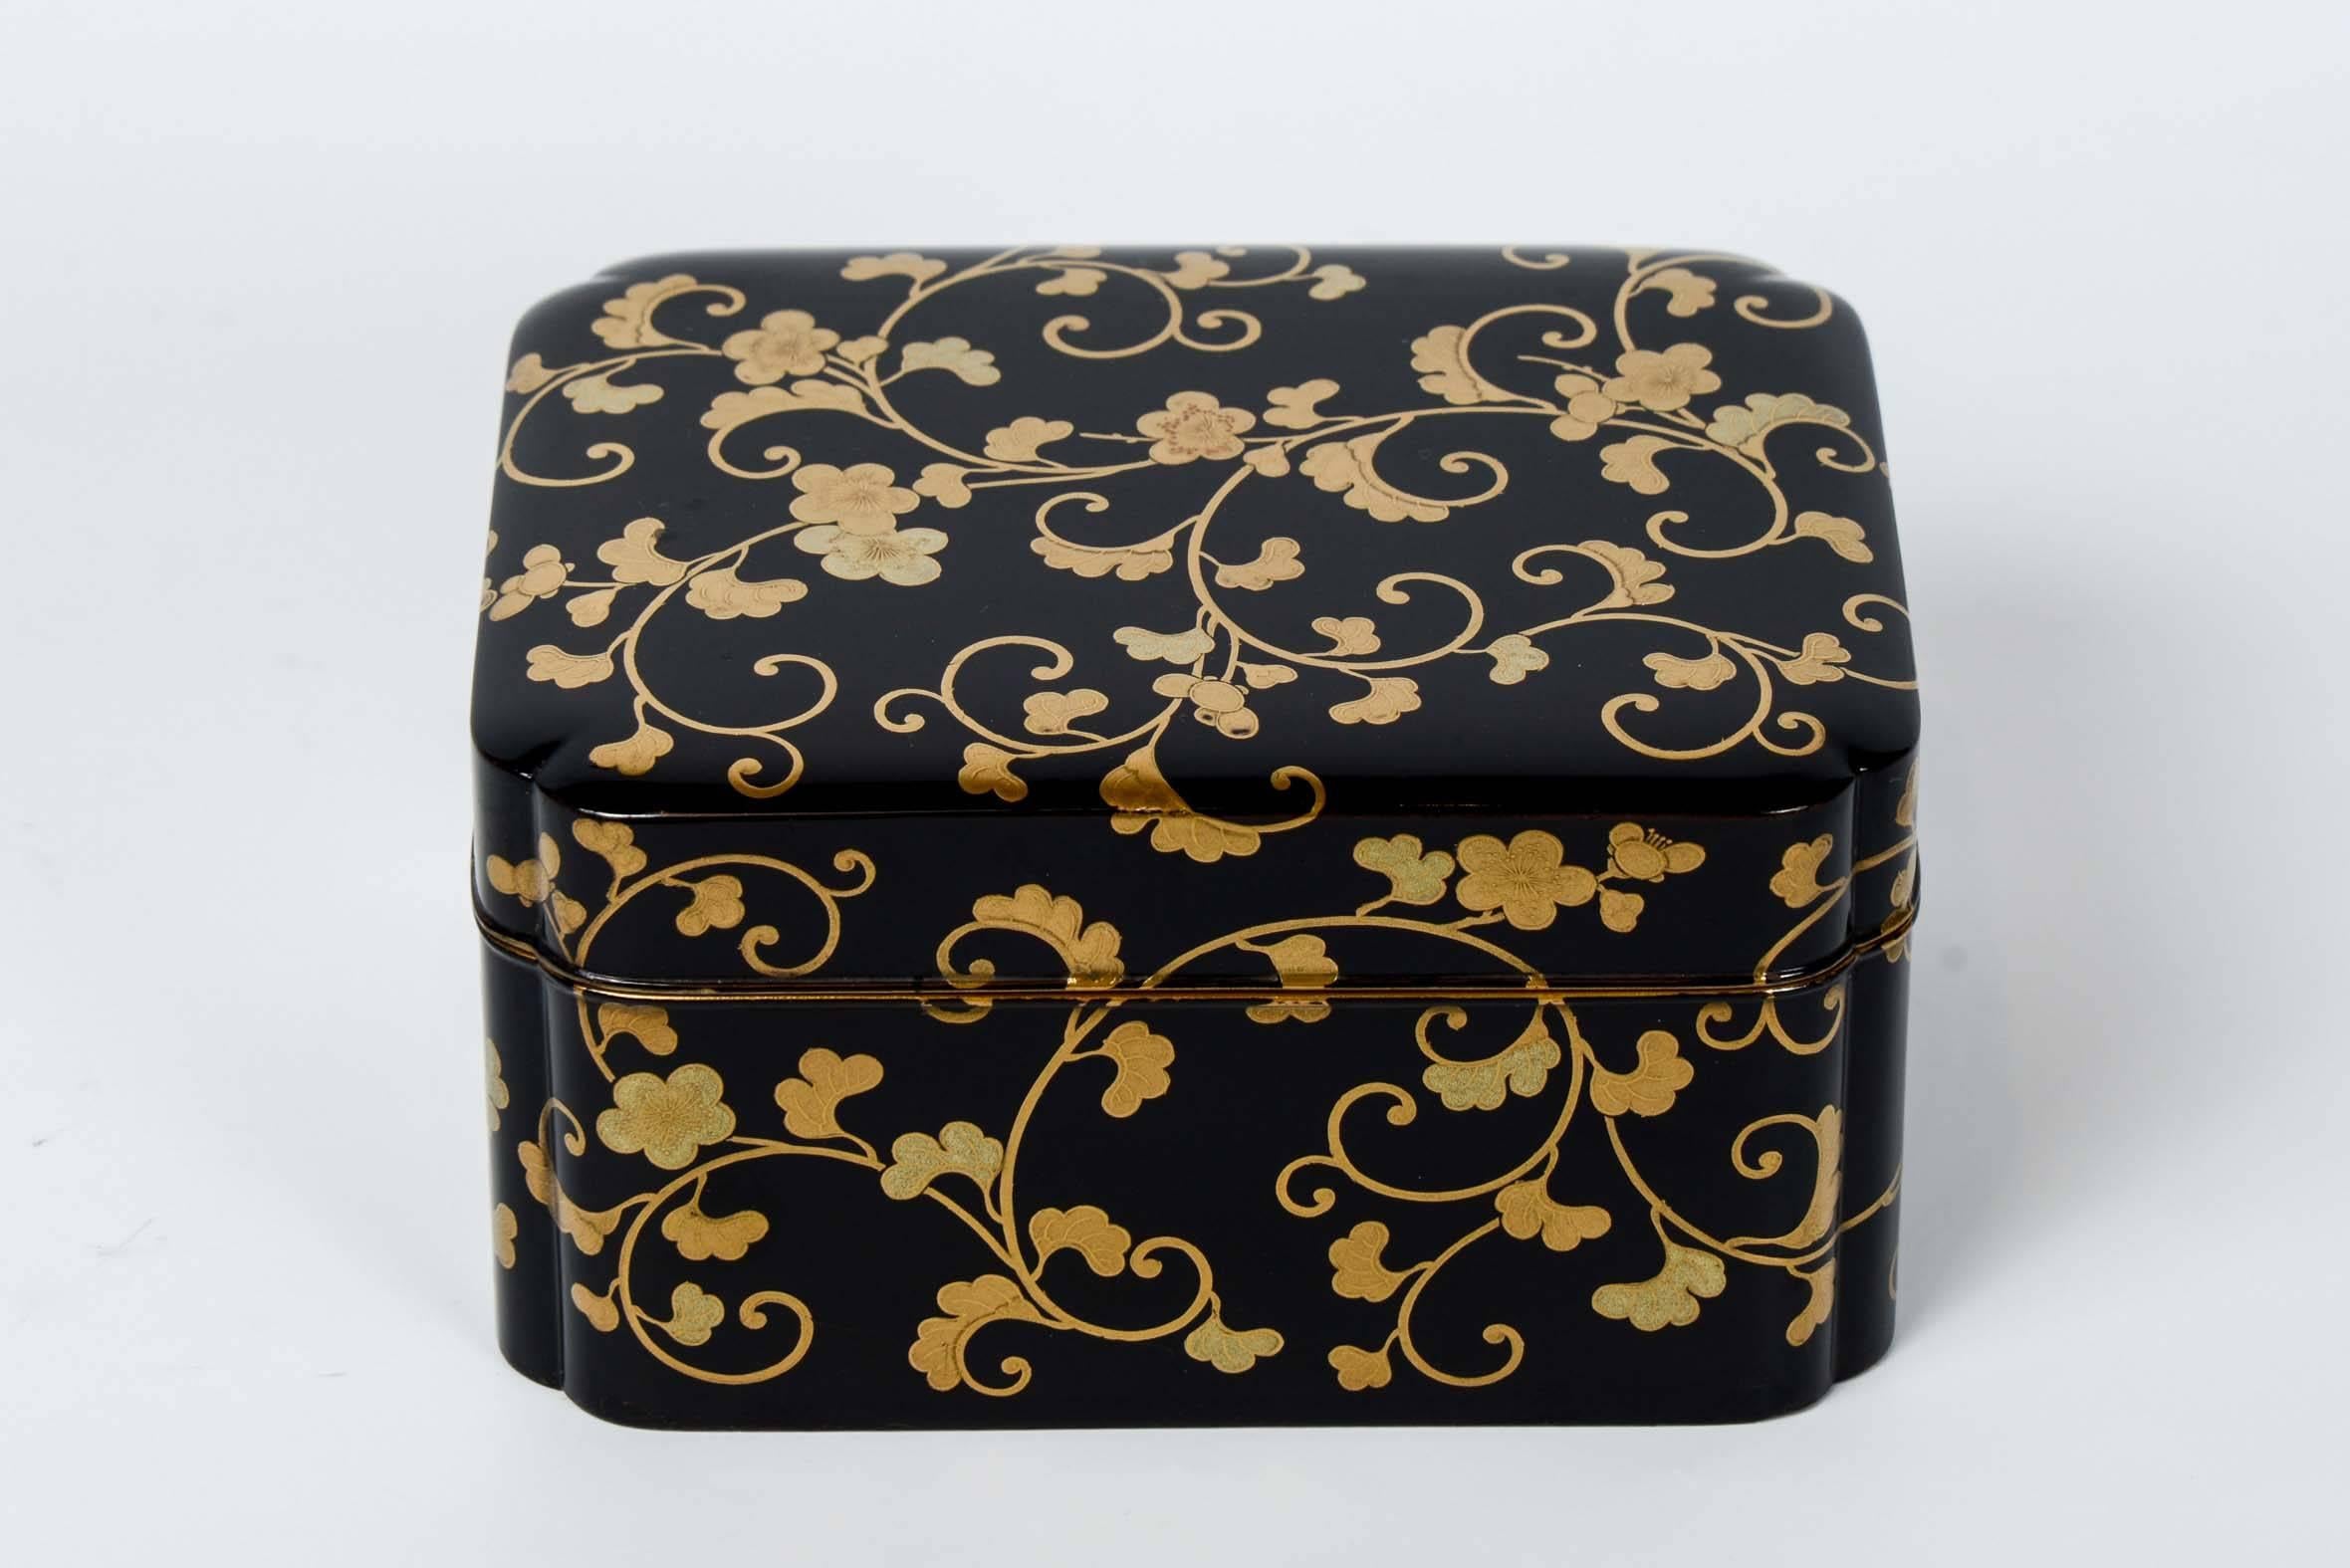 Lacquered 19th Century Meiji Japanese Black and Gold Lacquer Kobako (Lacquer Box)